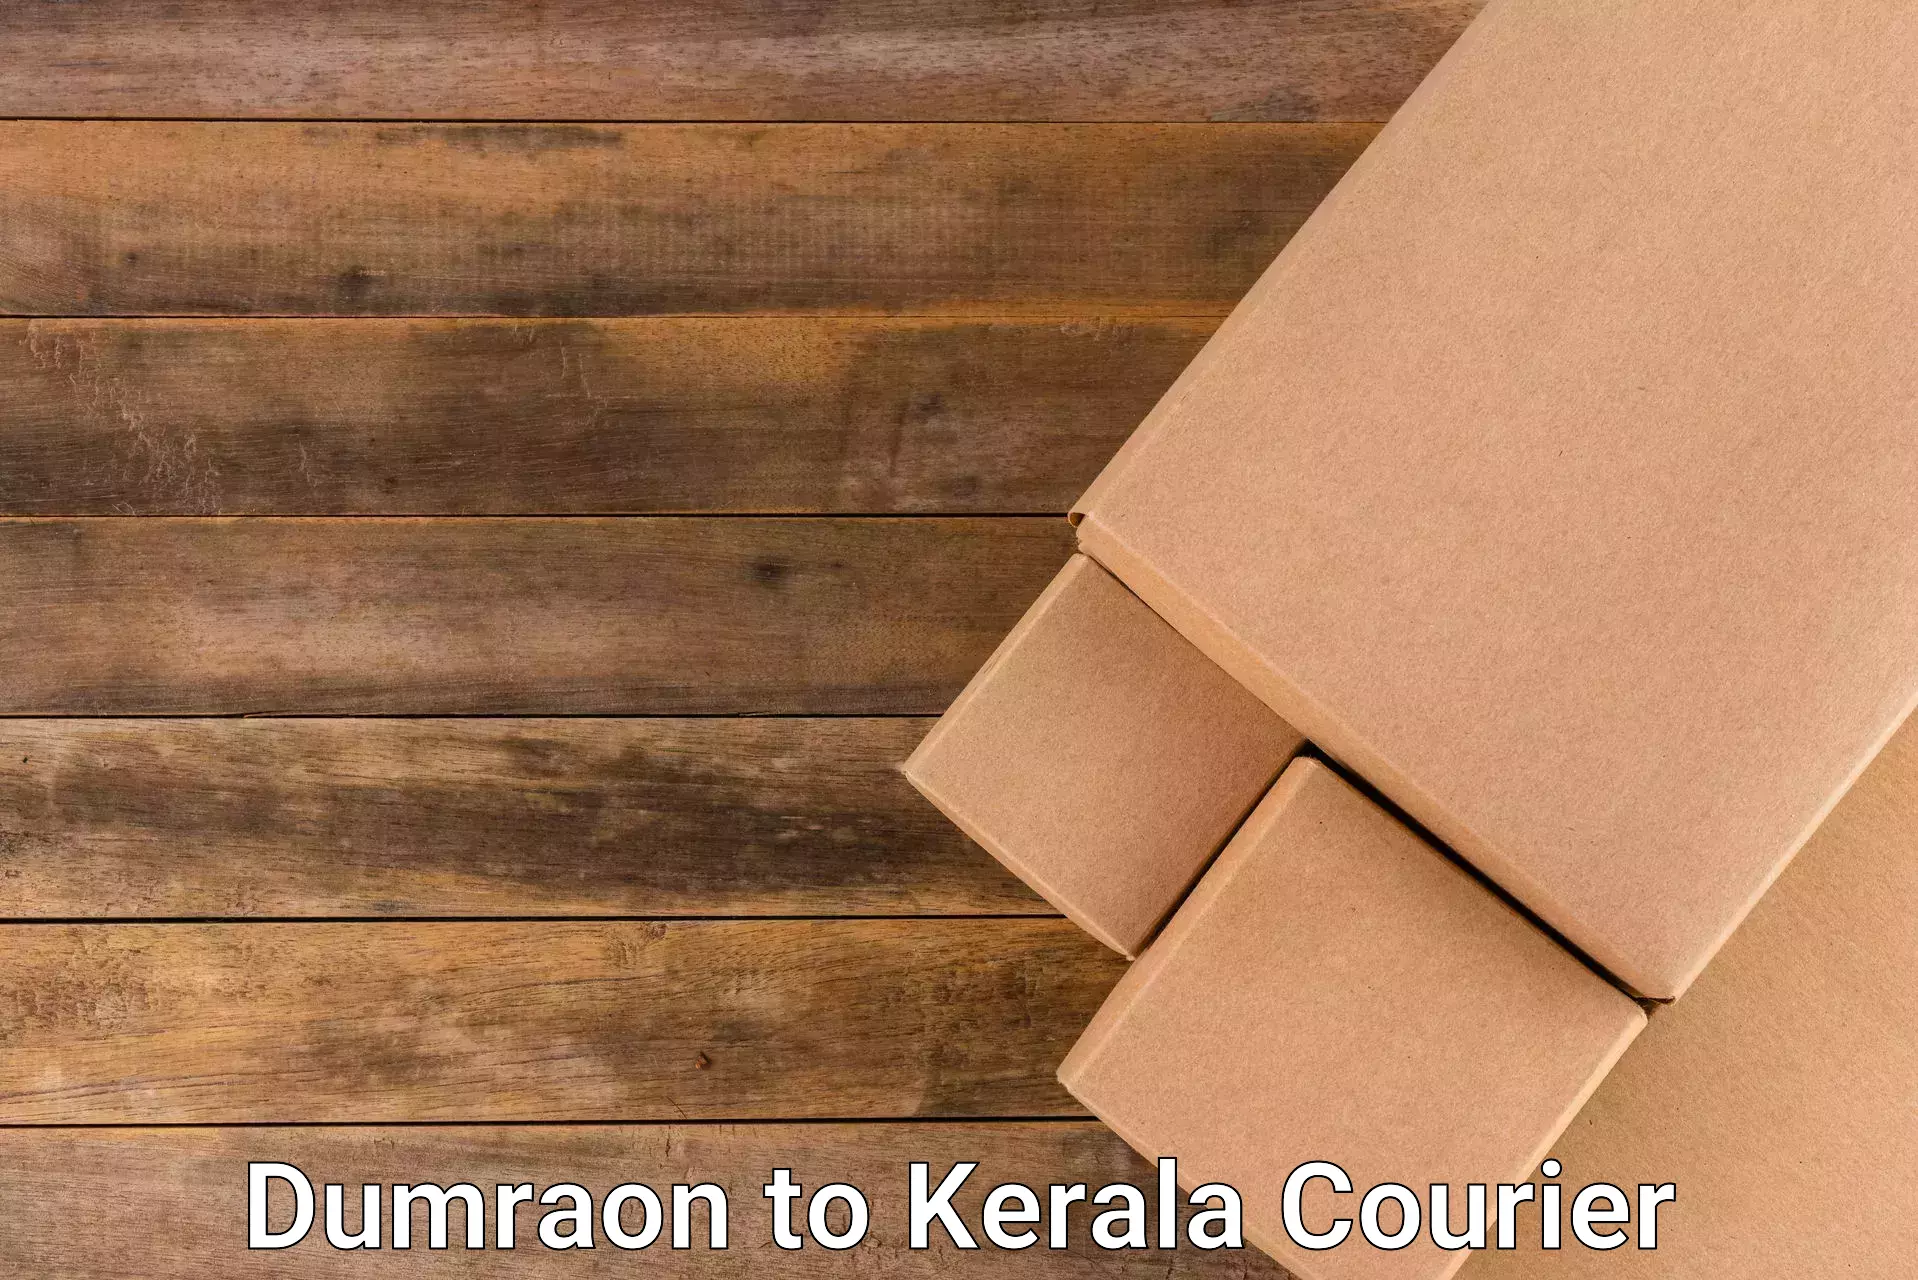 Courier service comparison in Dumraon to Vaikom